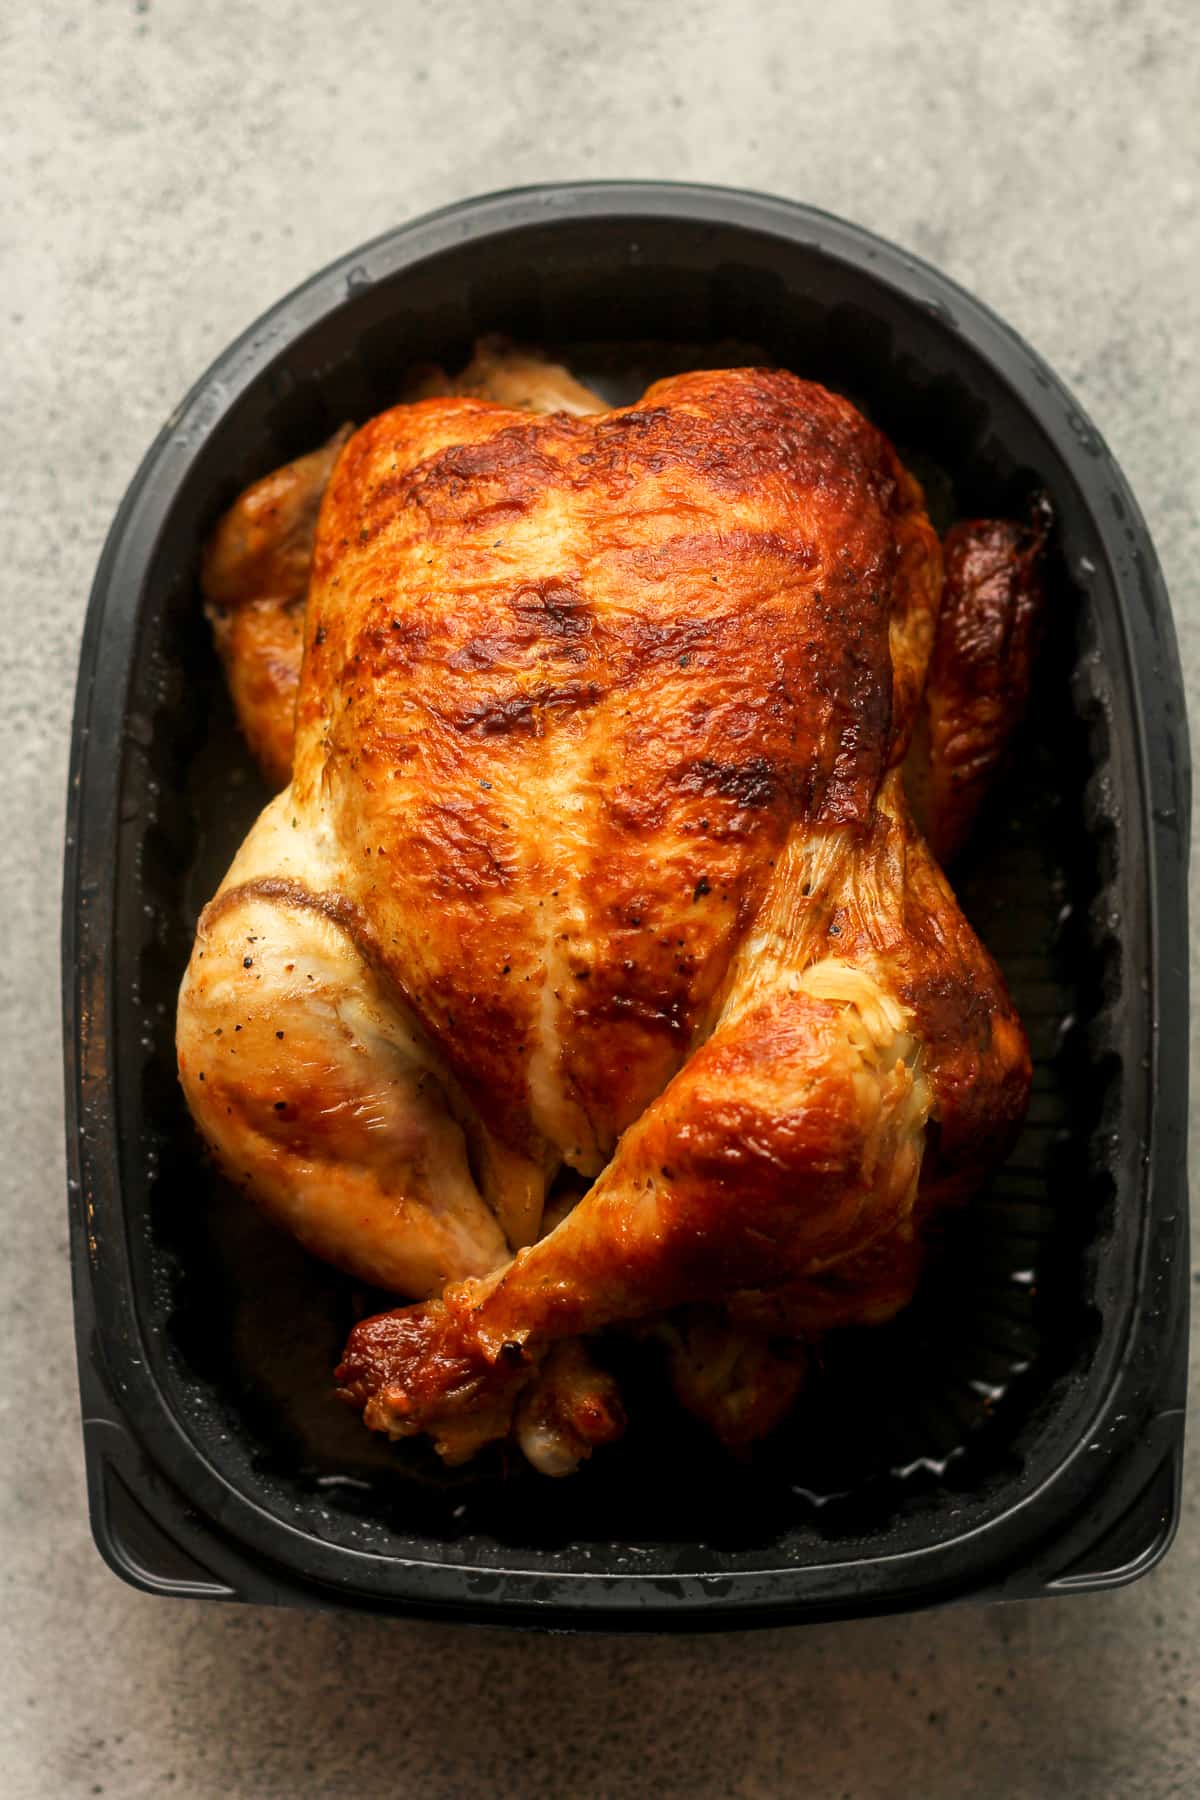 A whole rotisserie chicken in a throwaway container.